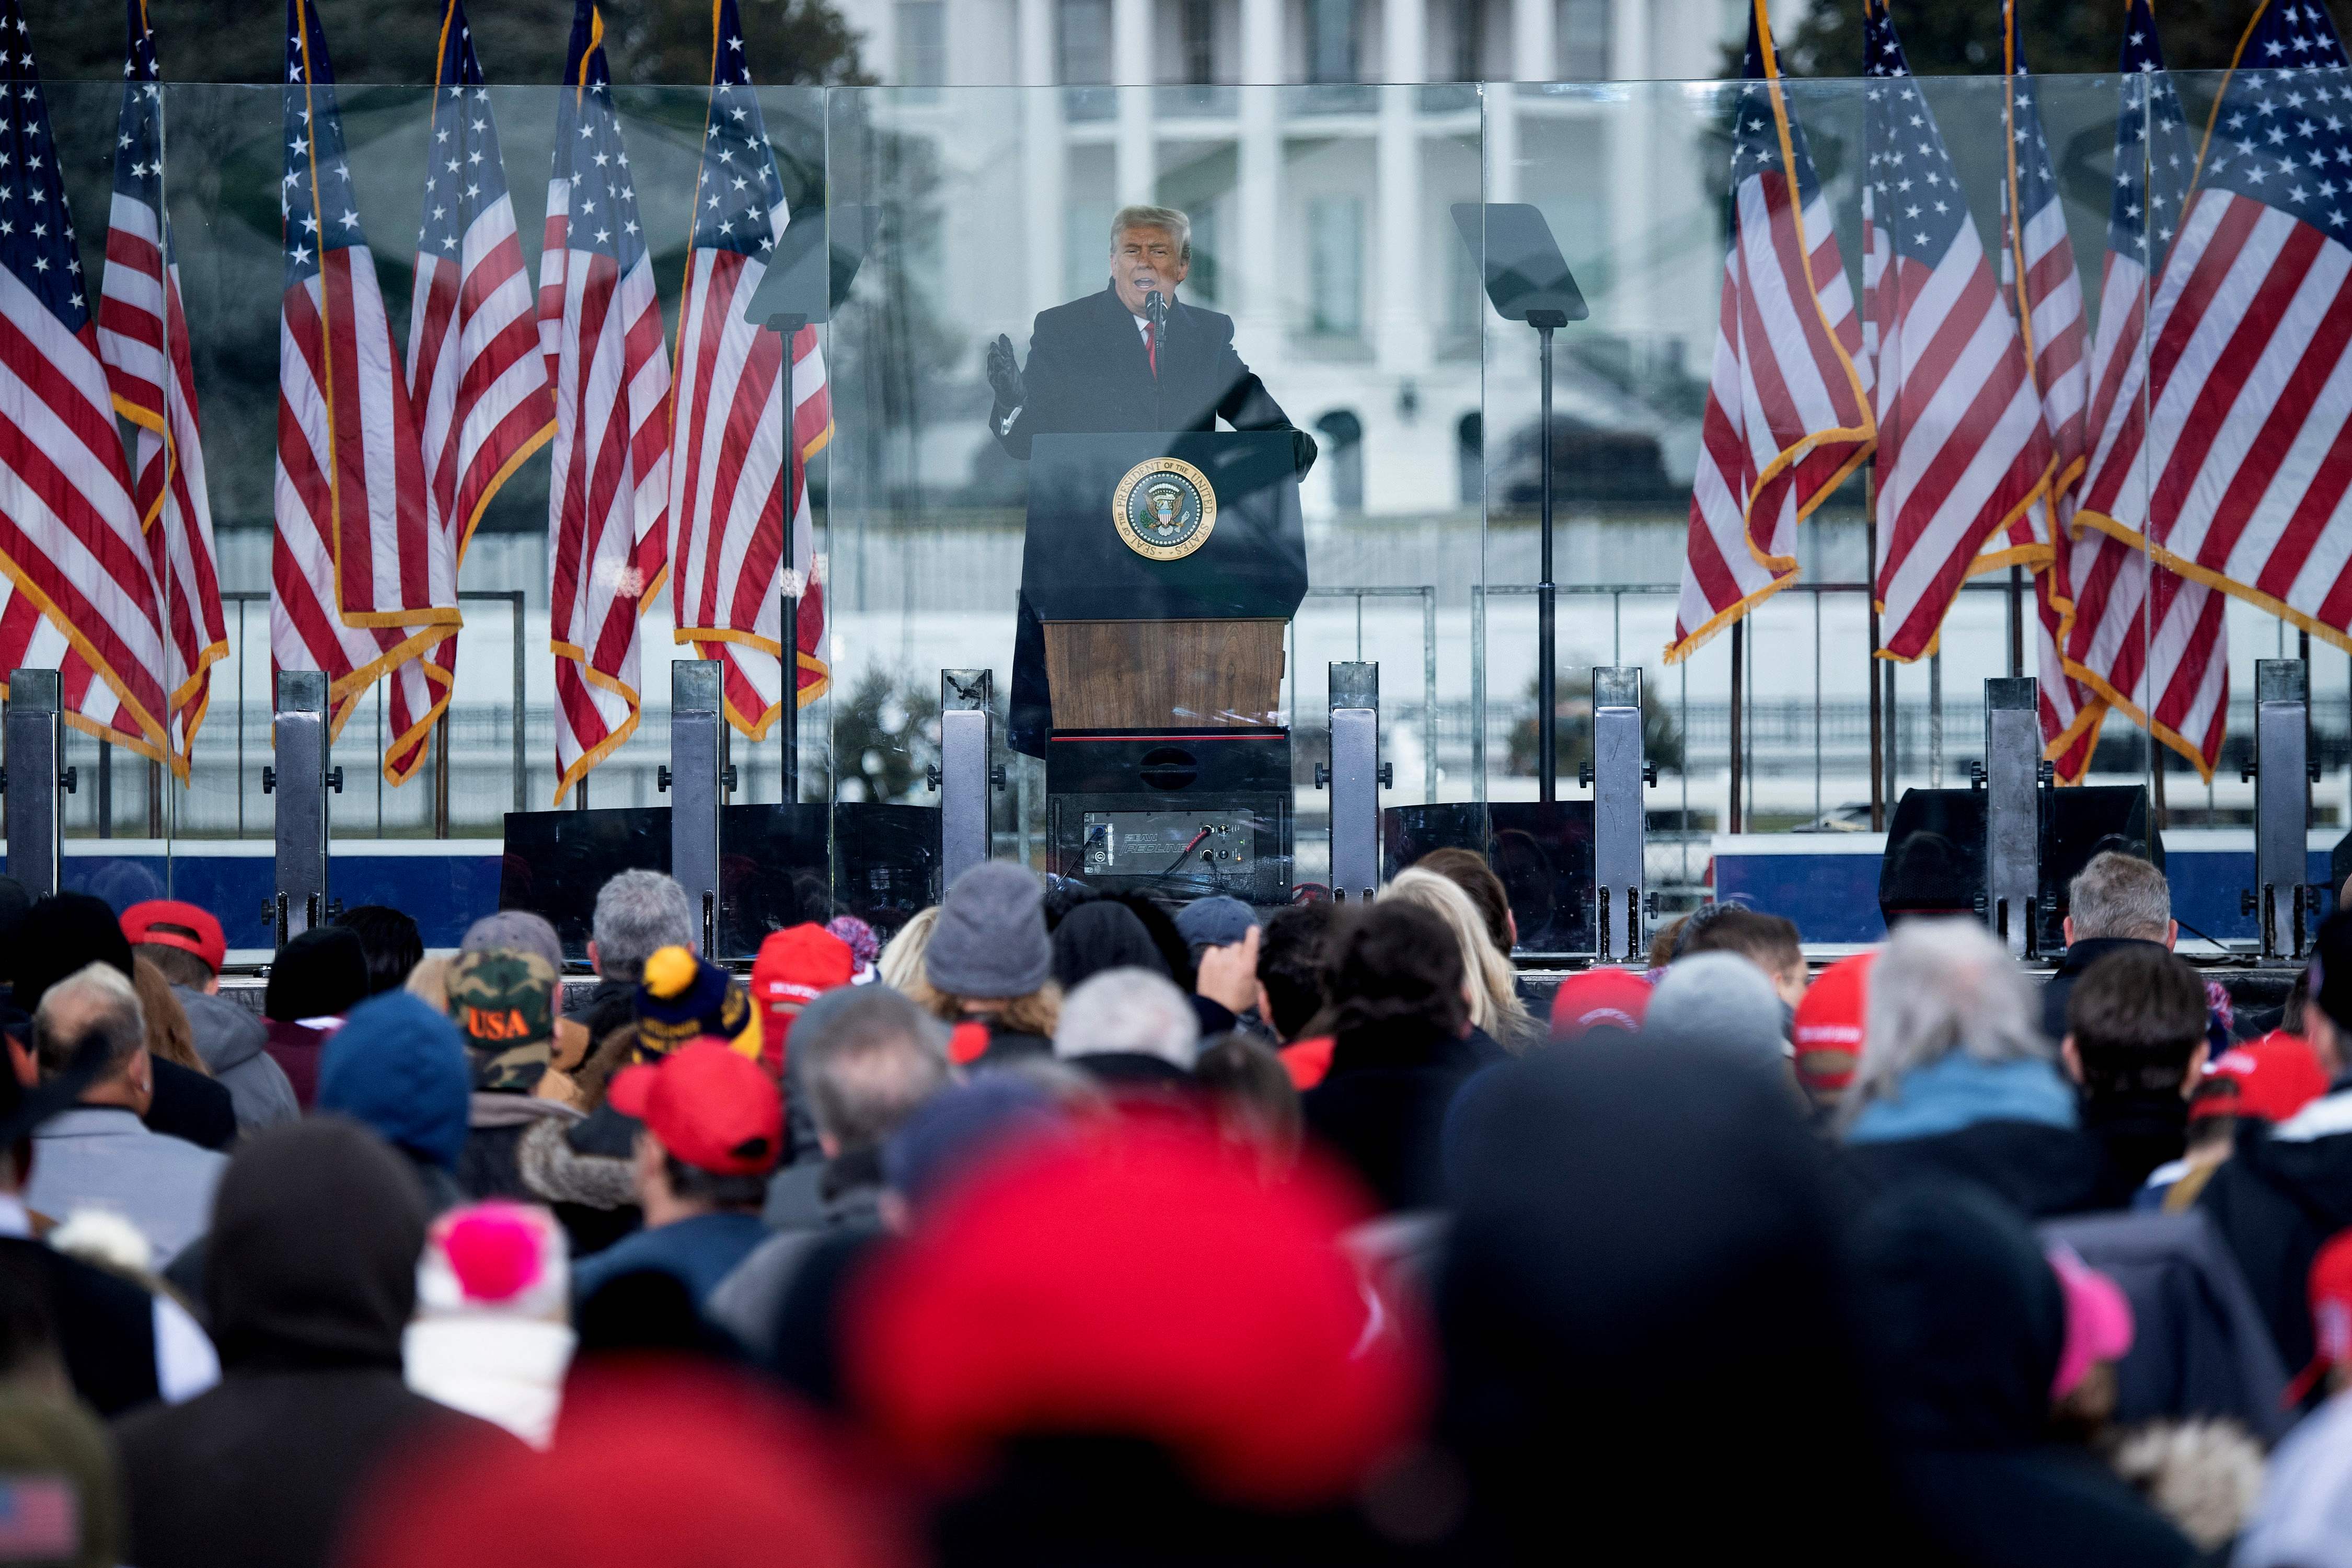 Donald Trump speaks to supporters from The Ellipse near the White House in Washington, DC on 6 January 2021